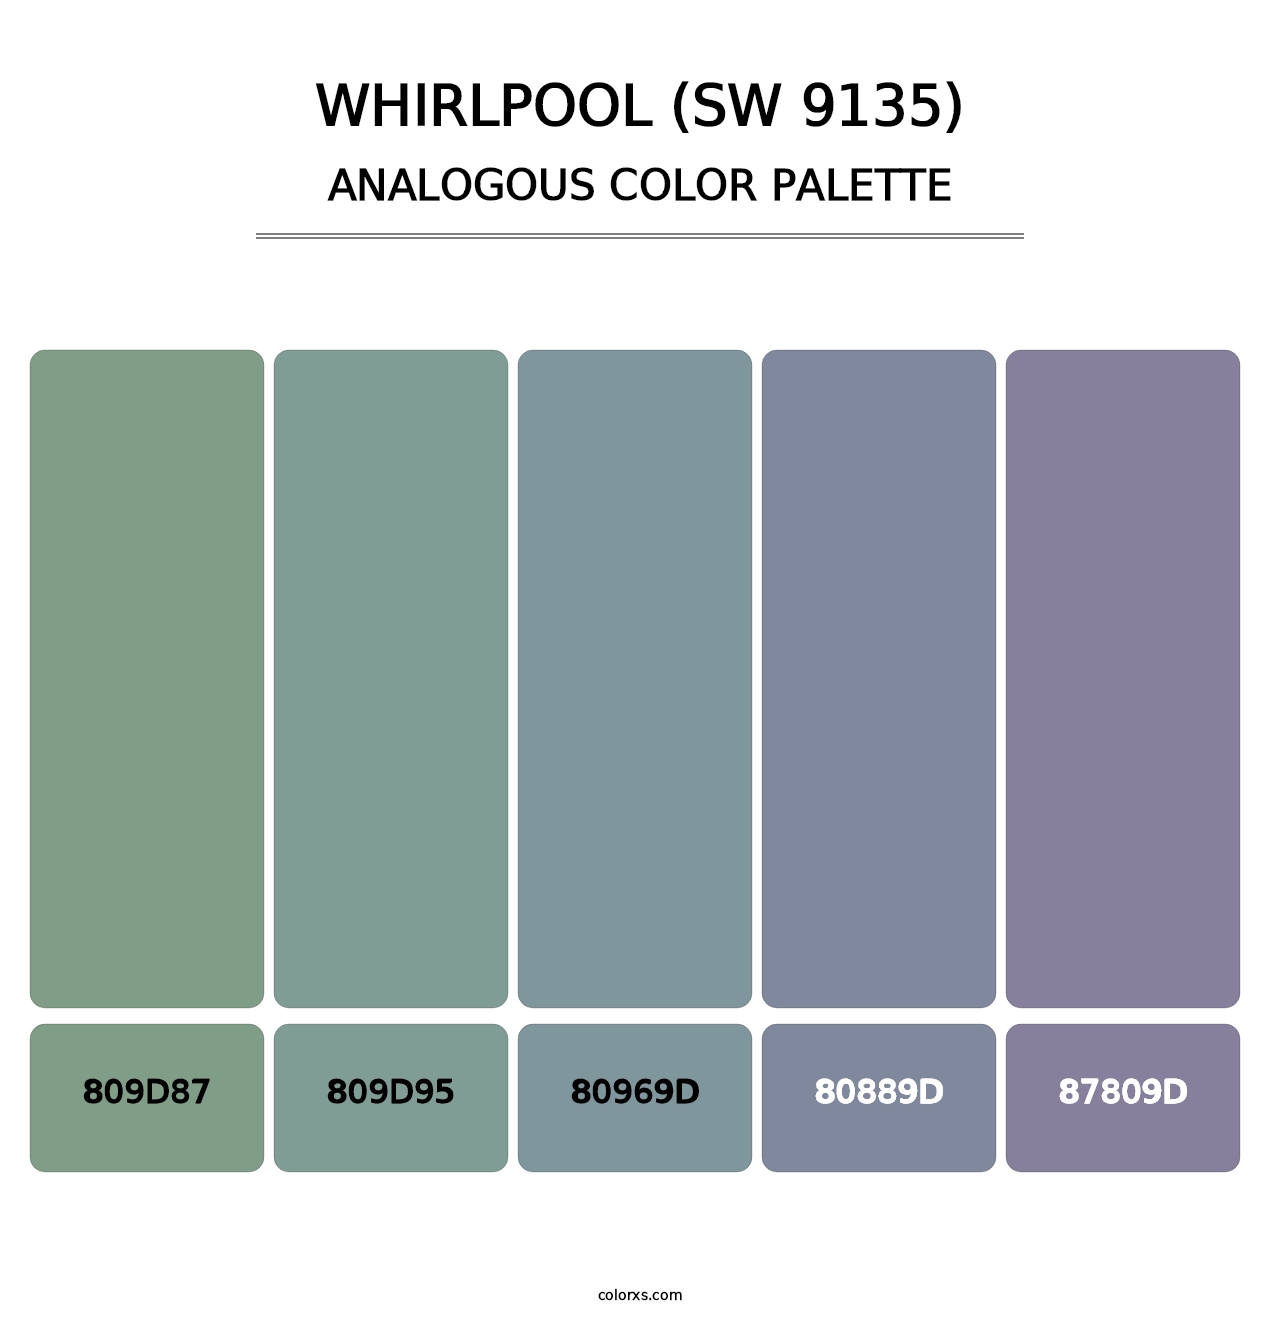 Whirlpool (SW 9135) - Analogous Color Palette